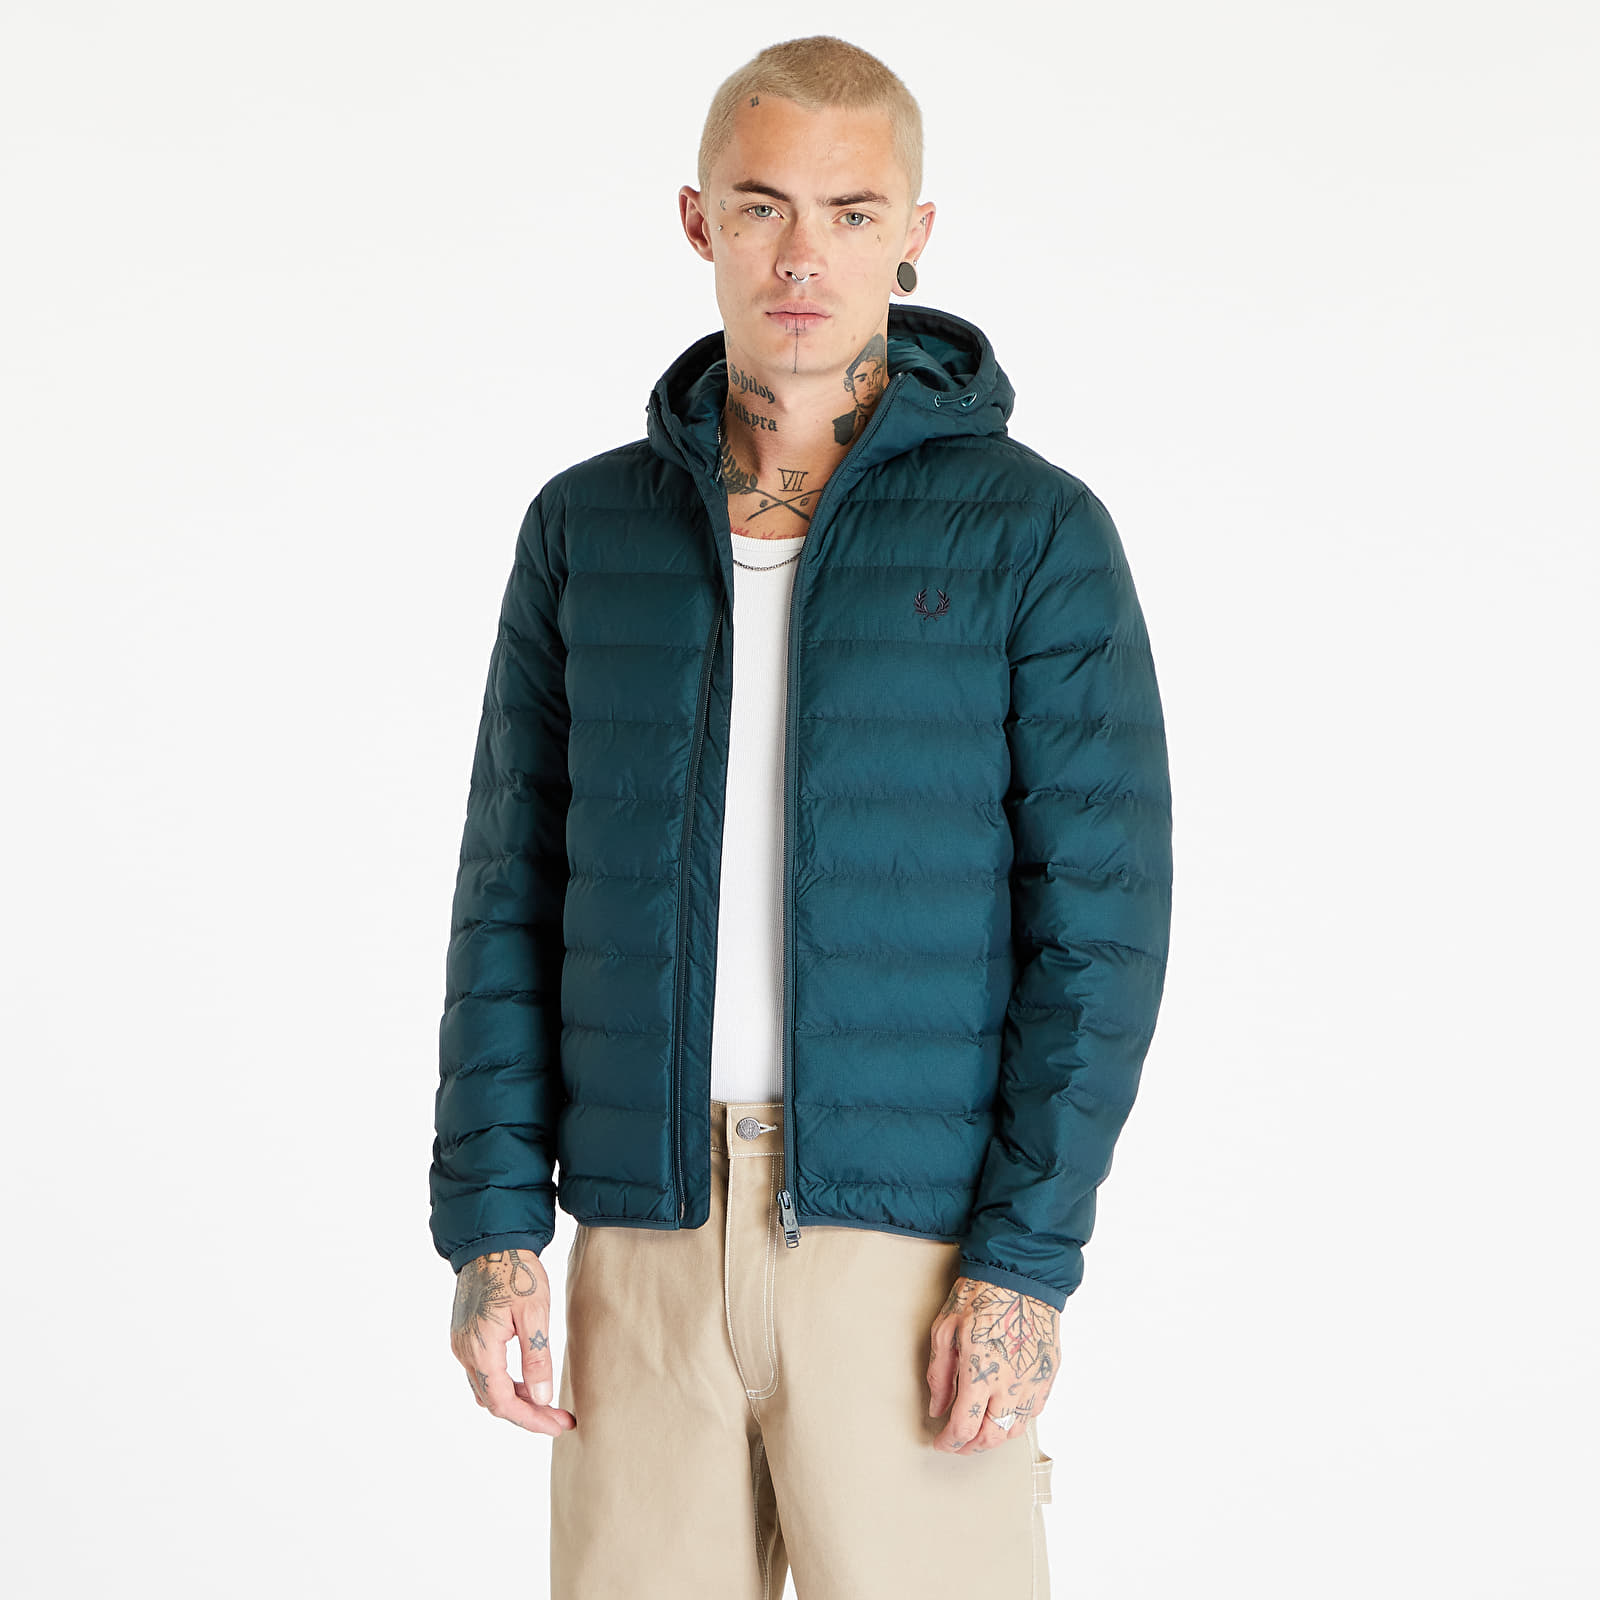 Bundy FRED PERRY Hooded Insulated Jacket Petrol Blue